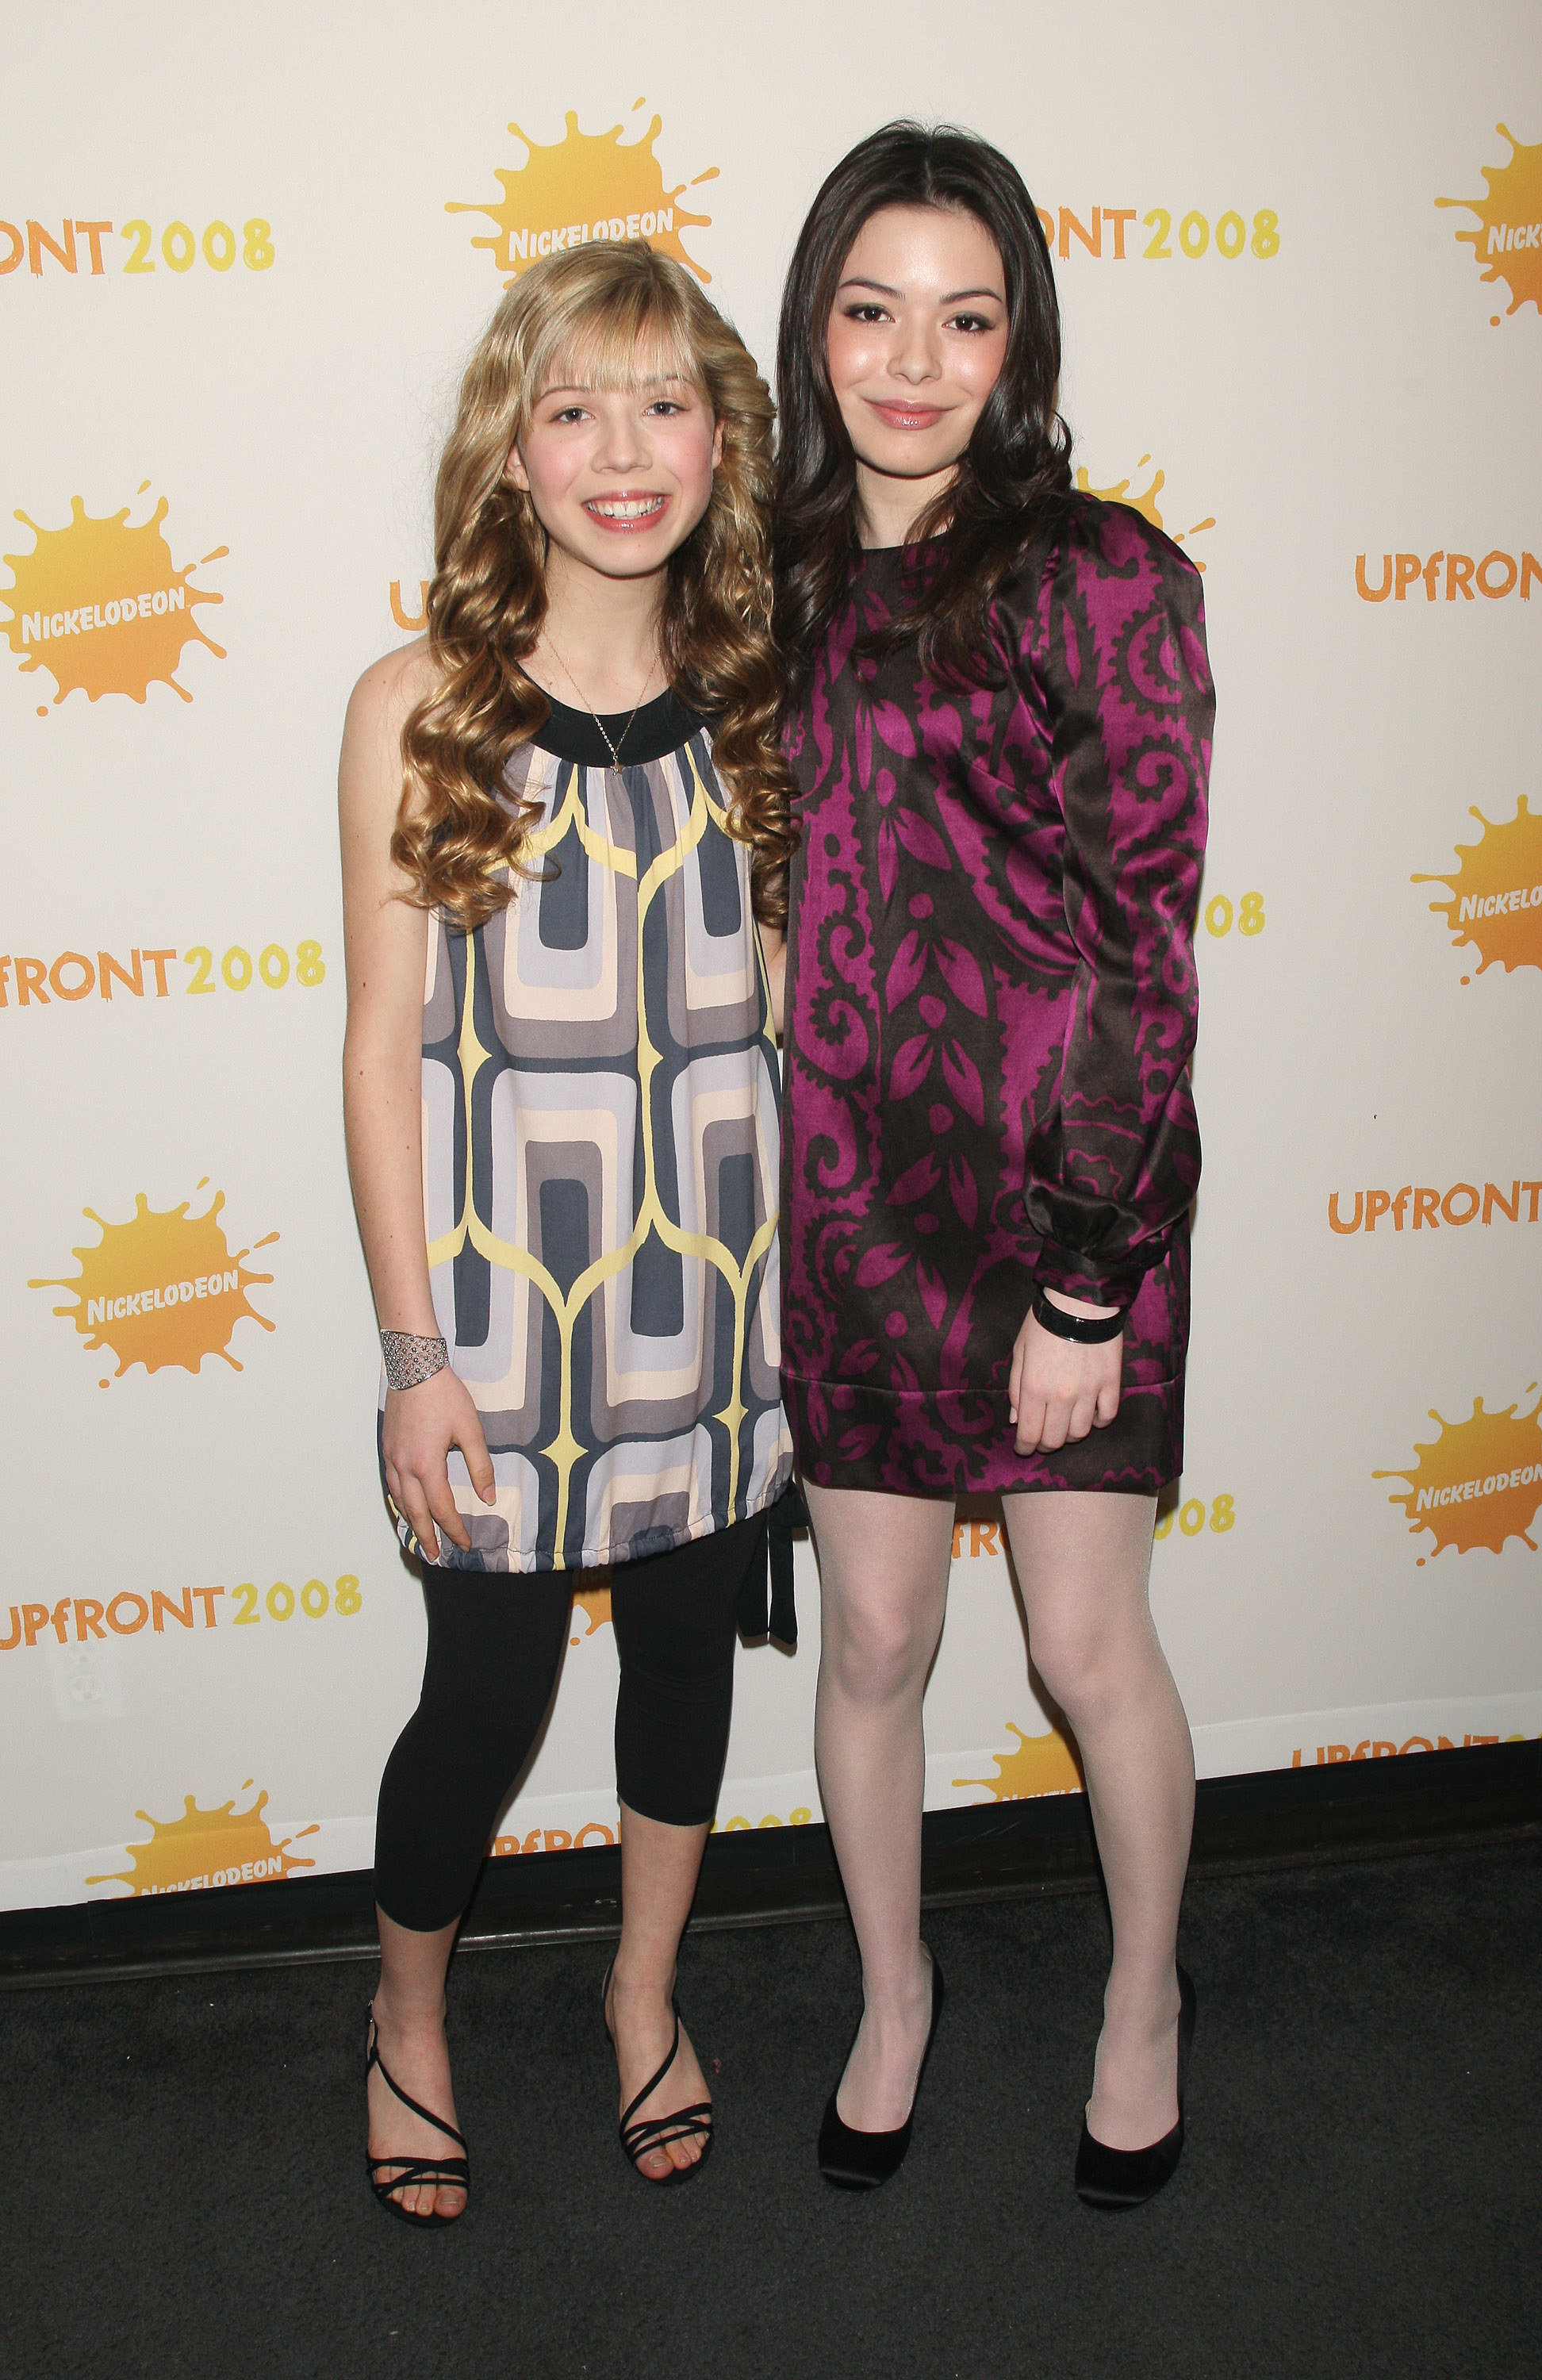 Jennette McCurdy and Miranda Cosgrove pose together